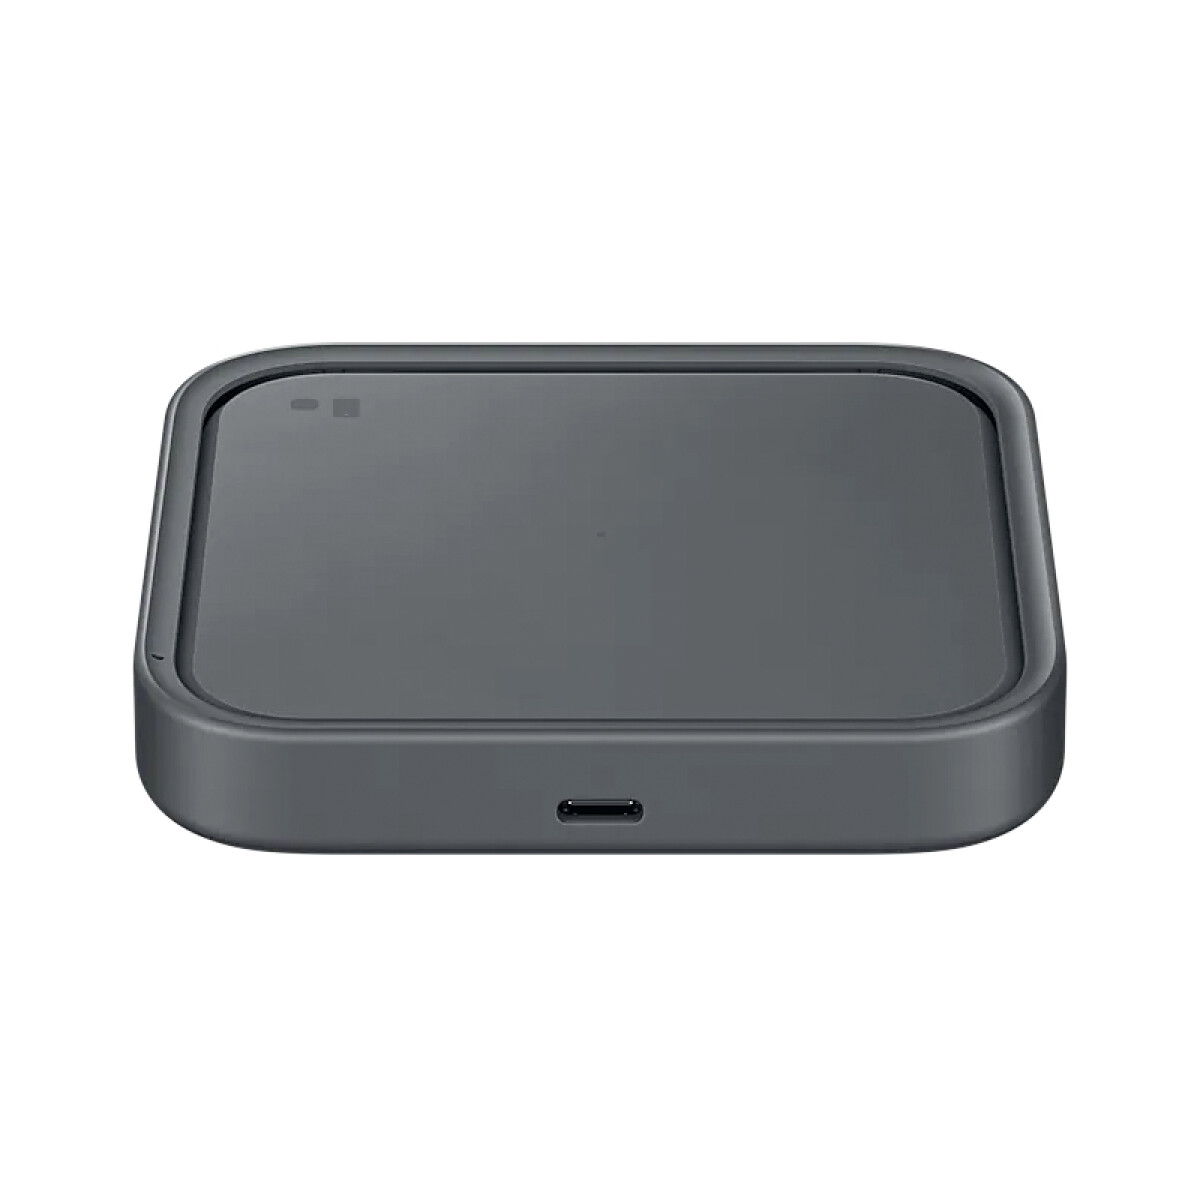 Super Fast Wireless Charger Pad P2400 - Negro 